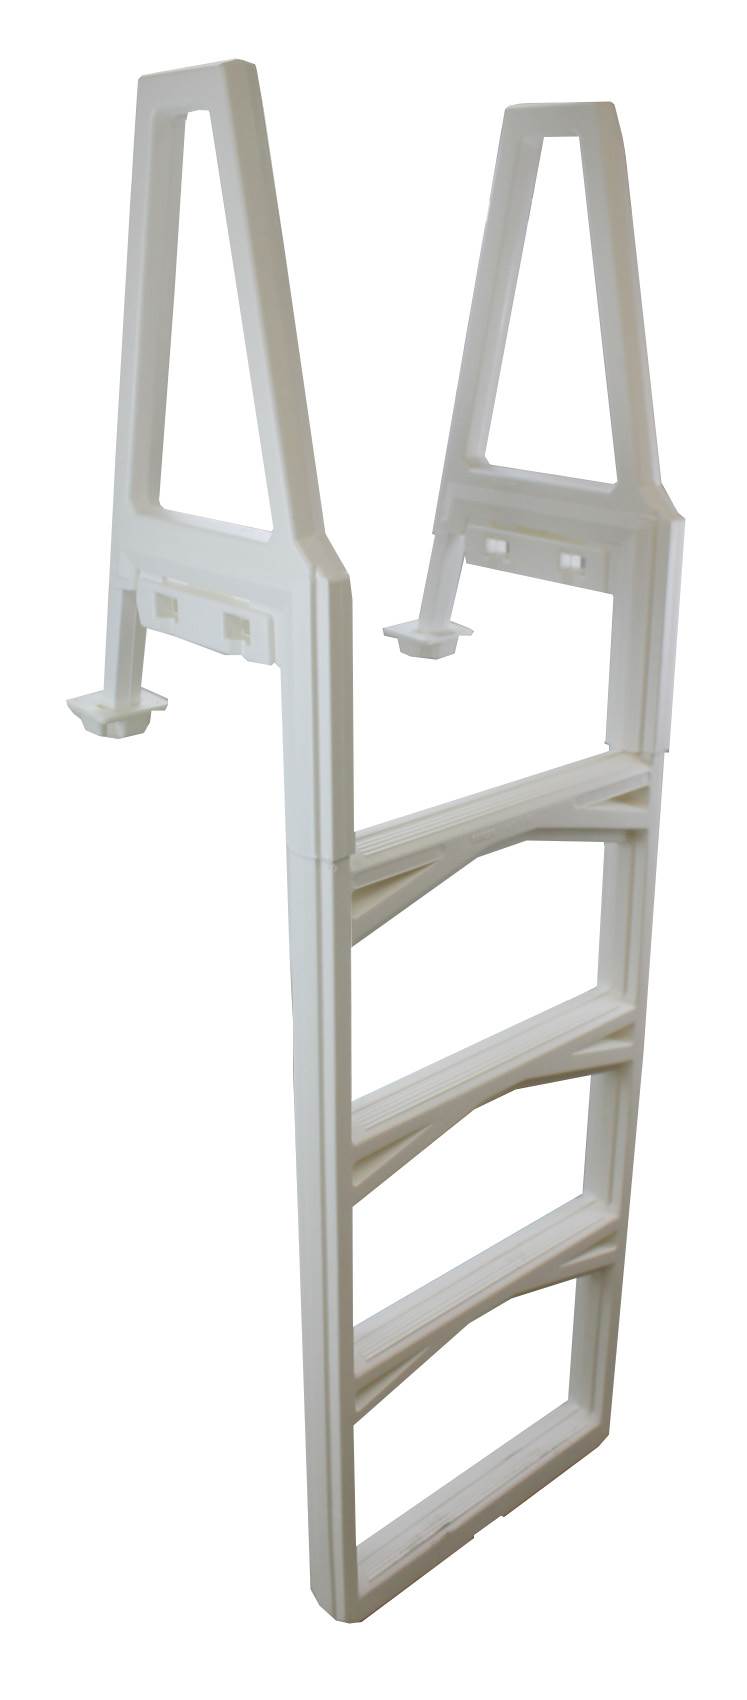 CONFER Adjustable In-Pool Above Ground Swimming Pool Sturdy Ladder (2 Pack)